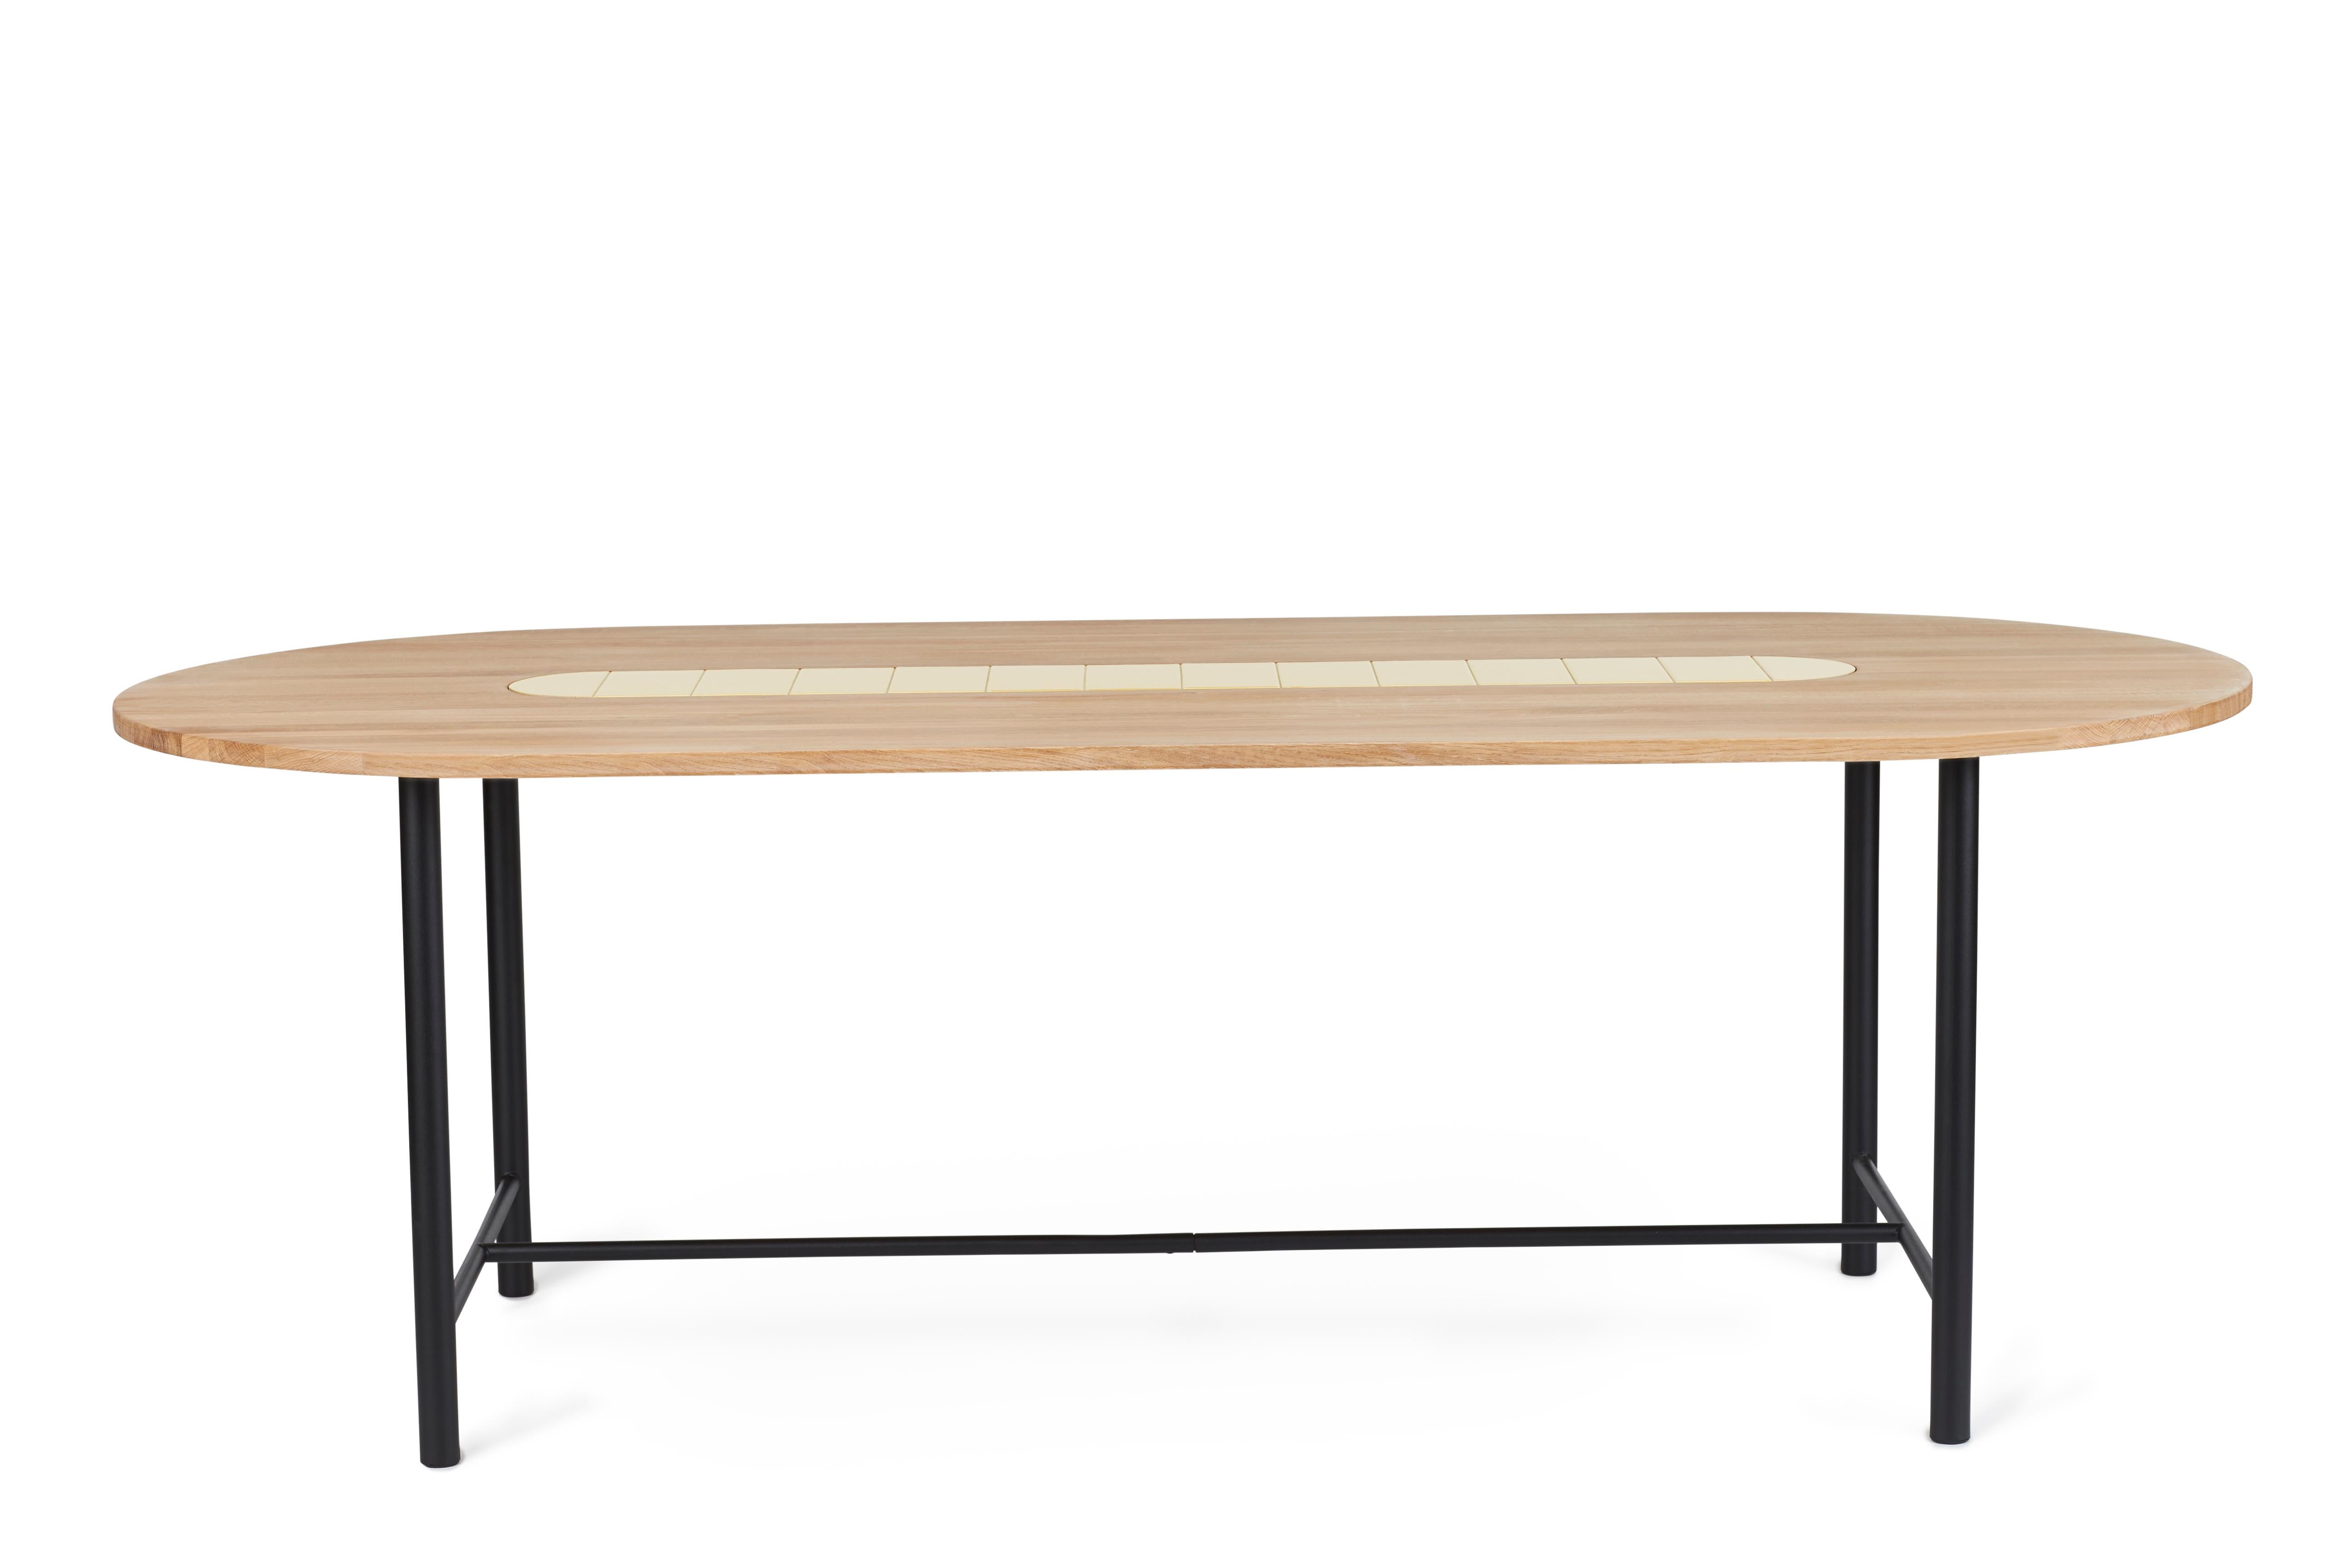 For Sale: Yellow (Butter yellow) Be My Guest Large Dining Table, by Charlotte Høncke from Warm Nordic